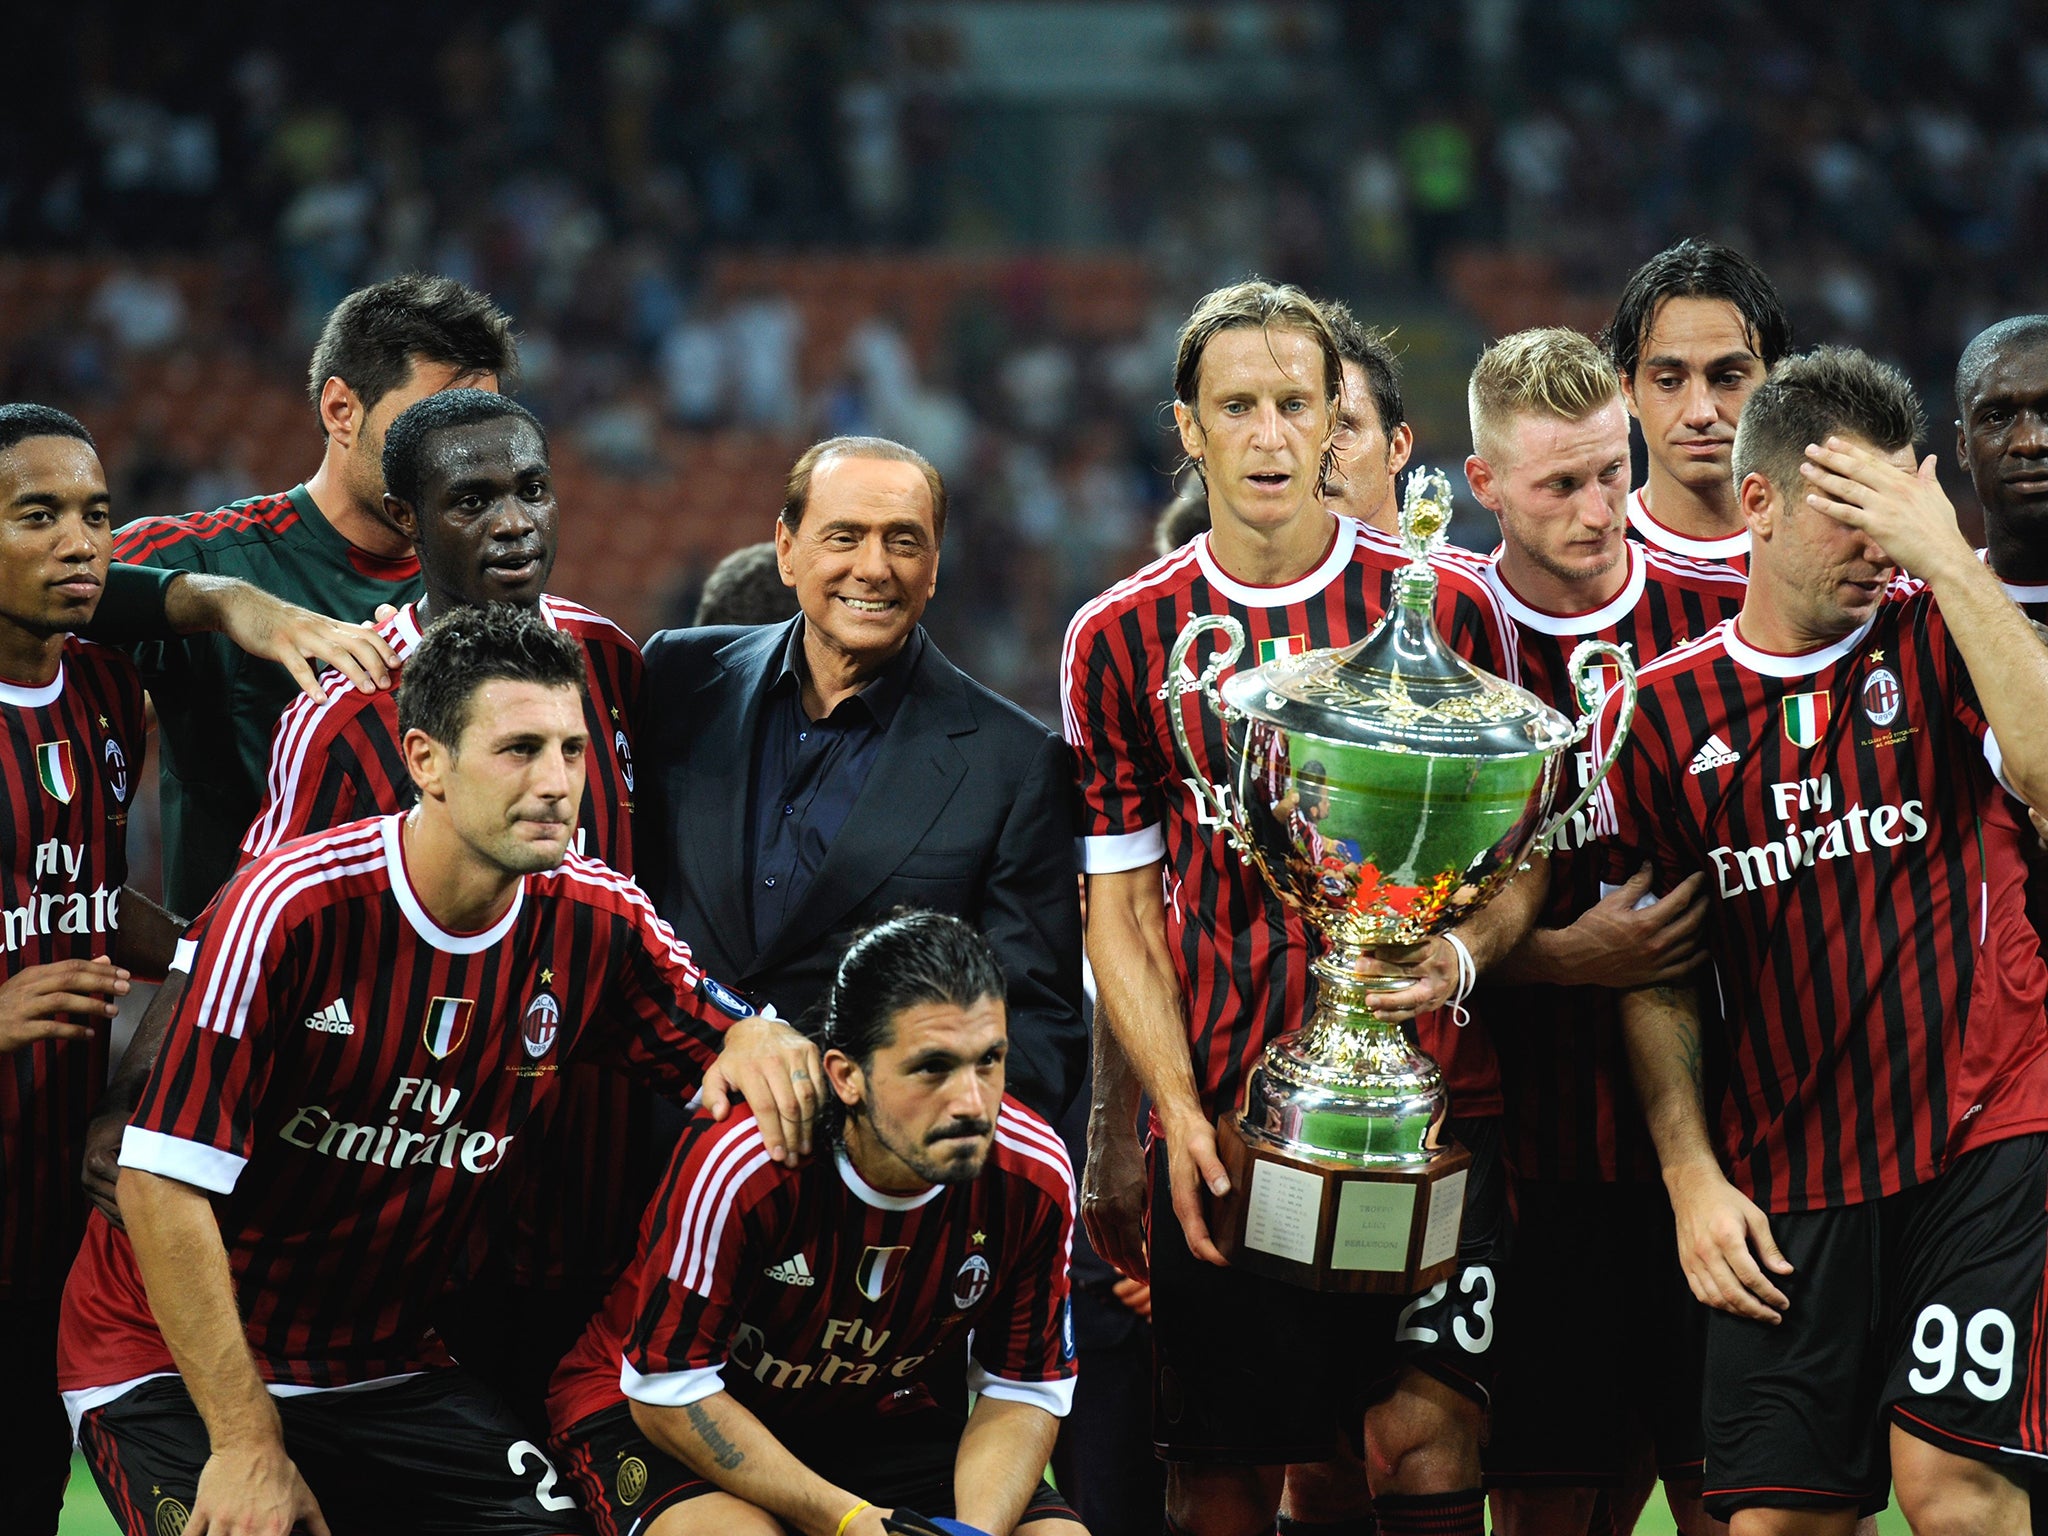 Even AC Milan, one of the jewels in the business empire of Silvio Berlusconi
(centre) is up for grabs